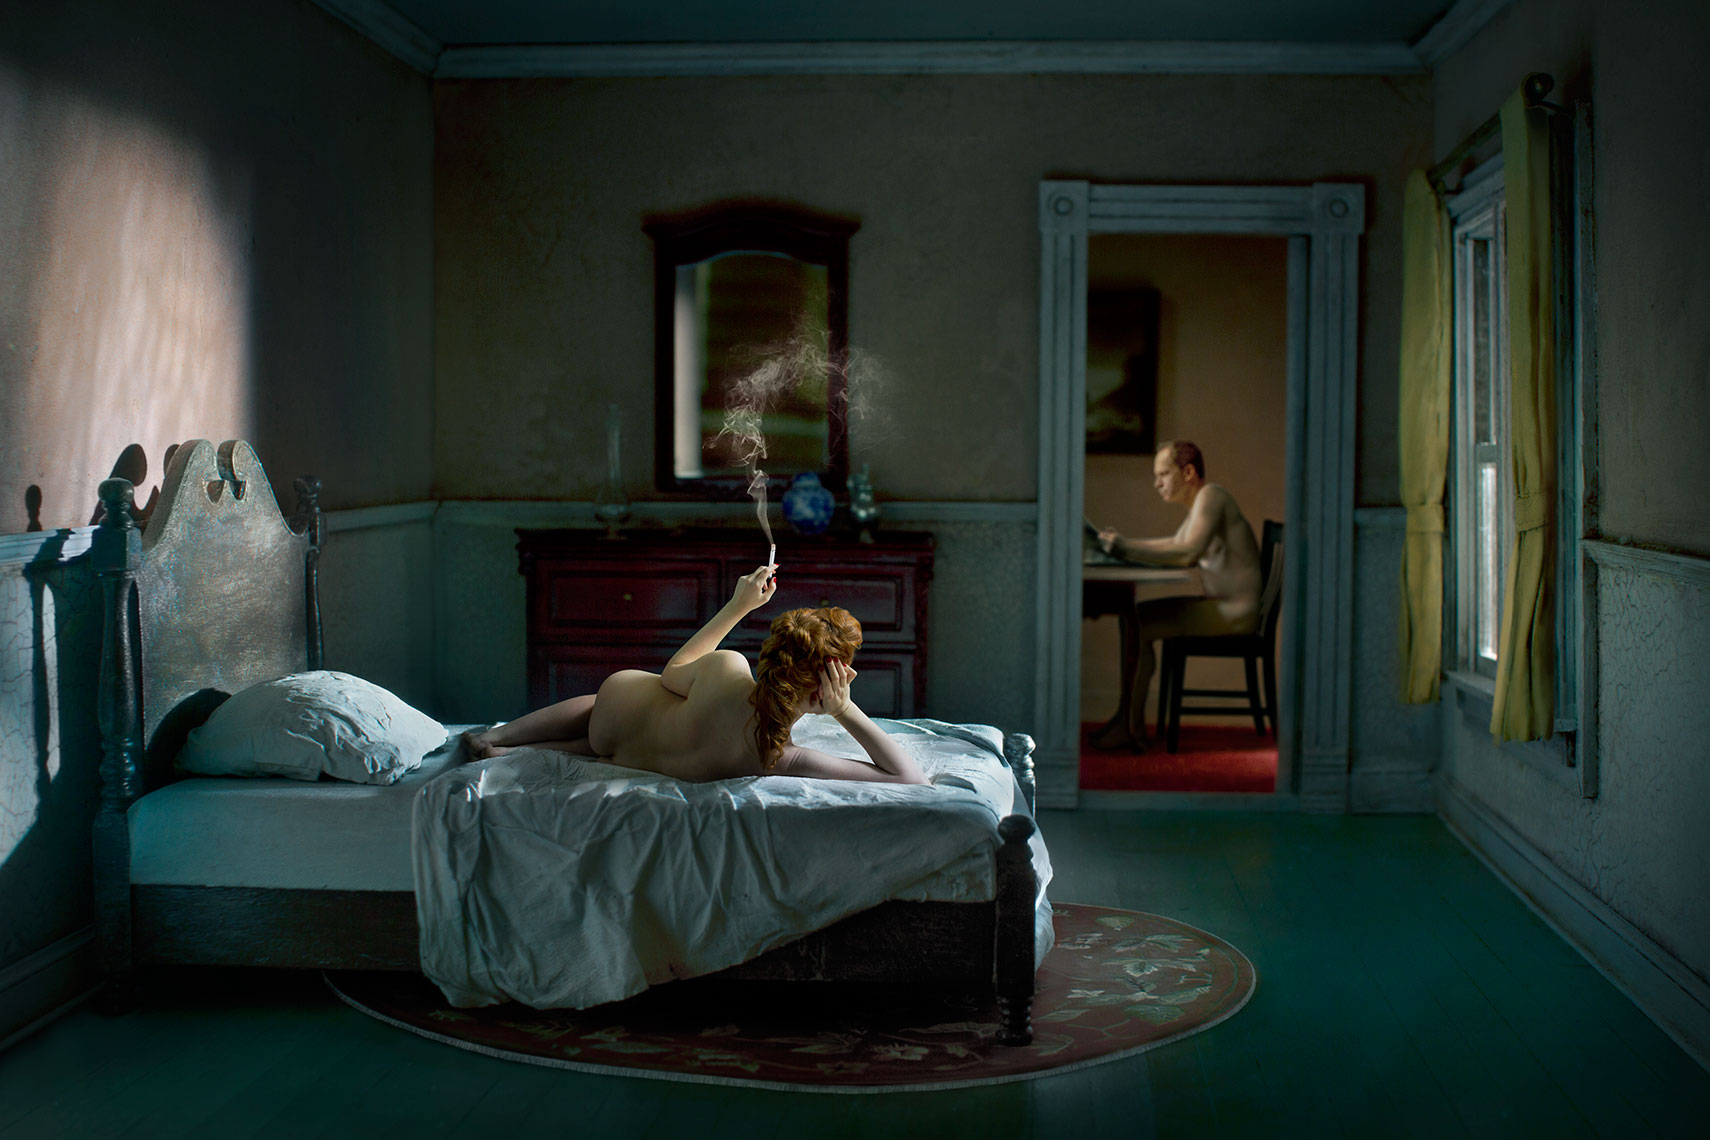 In a photomontage homage to Edward Hopper, in the foreground a young red-haired woman seen from the back lies nude on an unmade bed while smoking a cigarette in a 1940s’ New York apartment while in the background while in the background in the next room her nude male companion sits at at table reading.